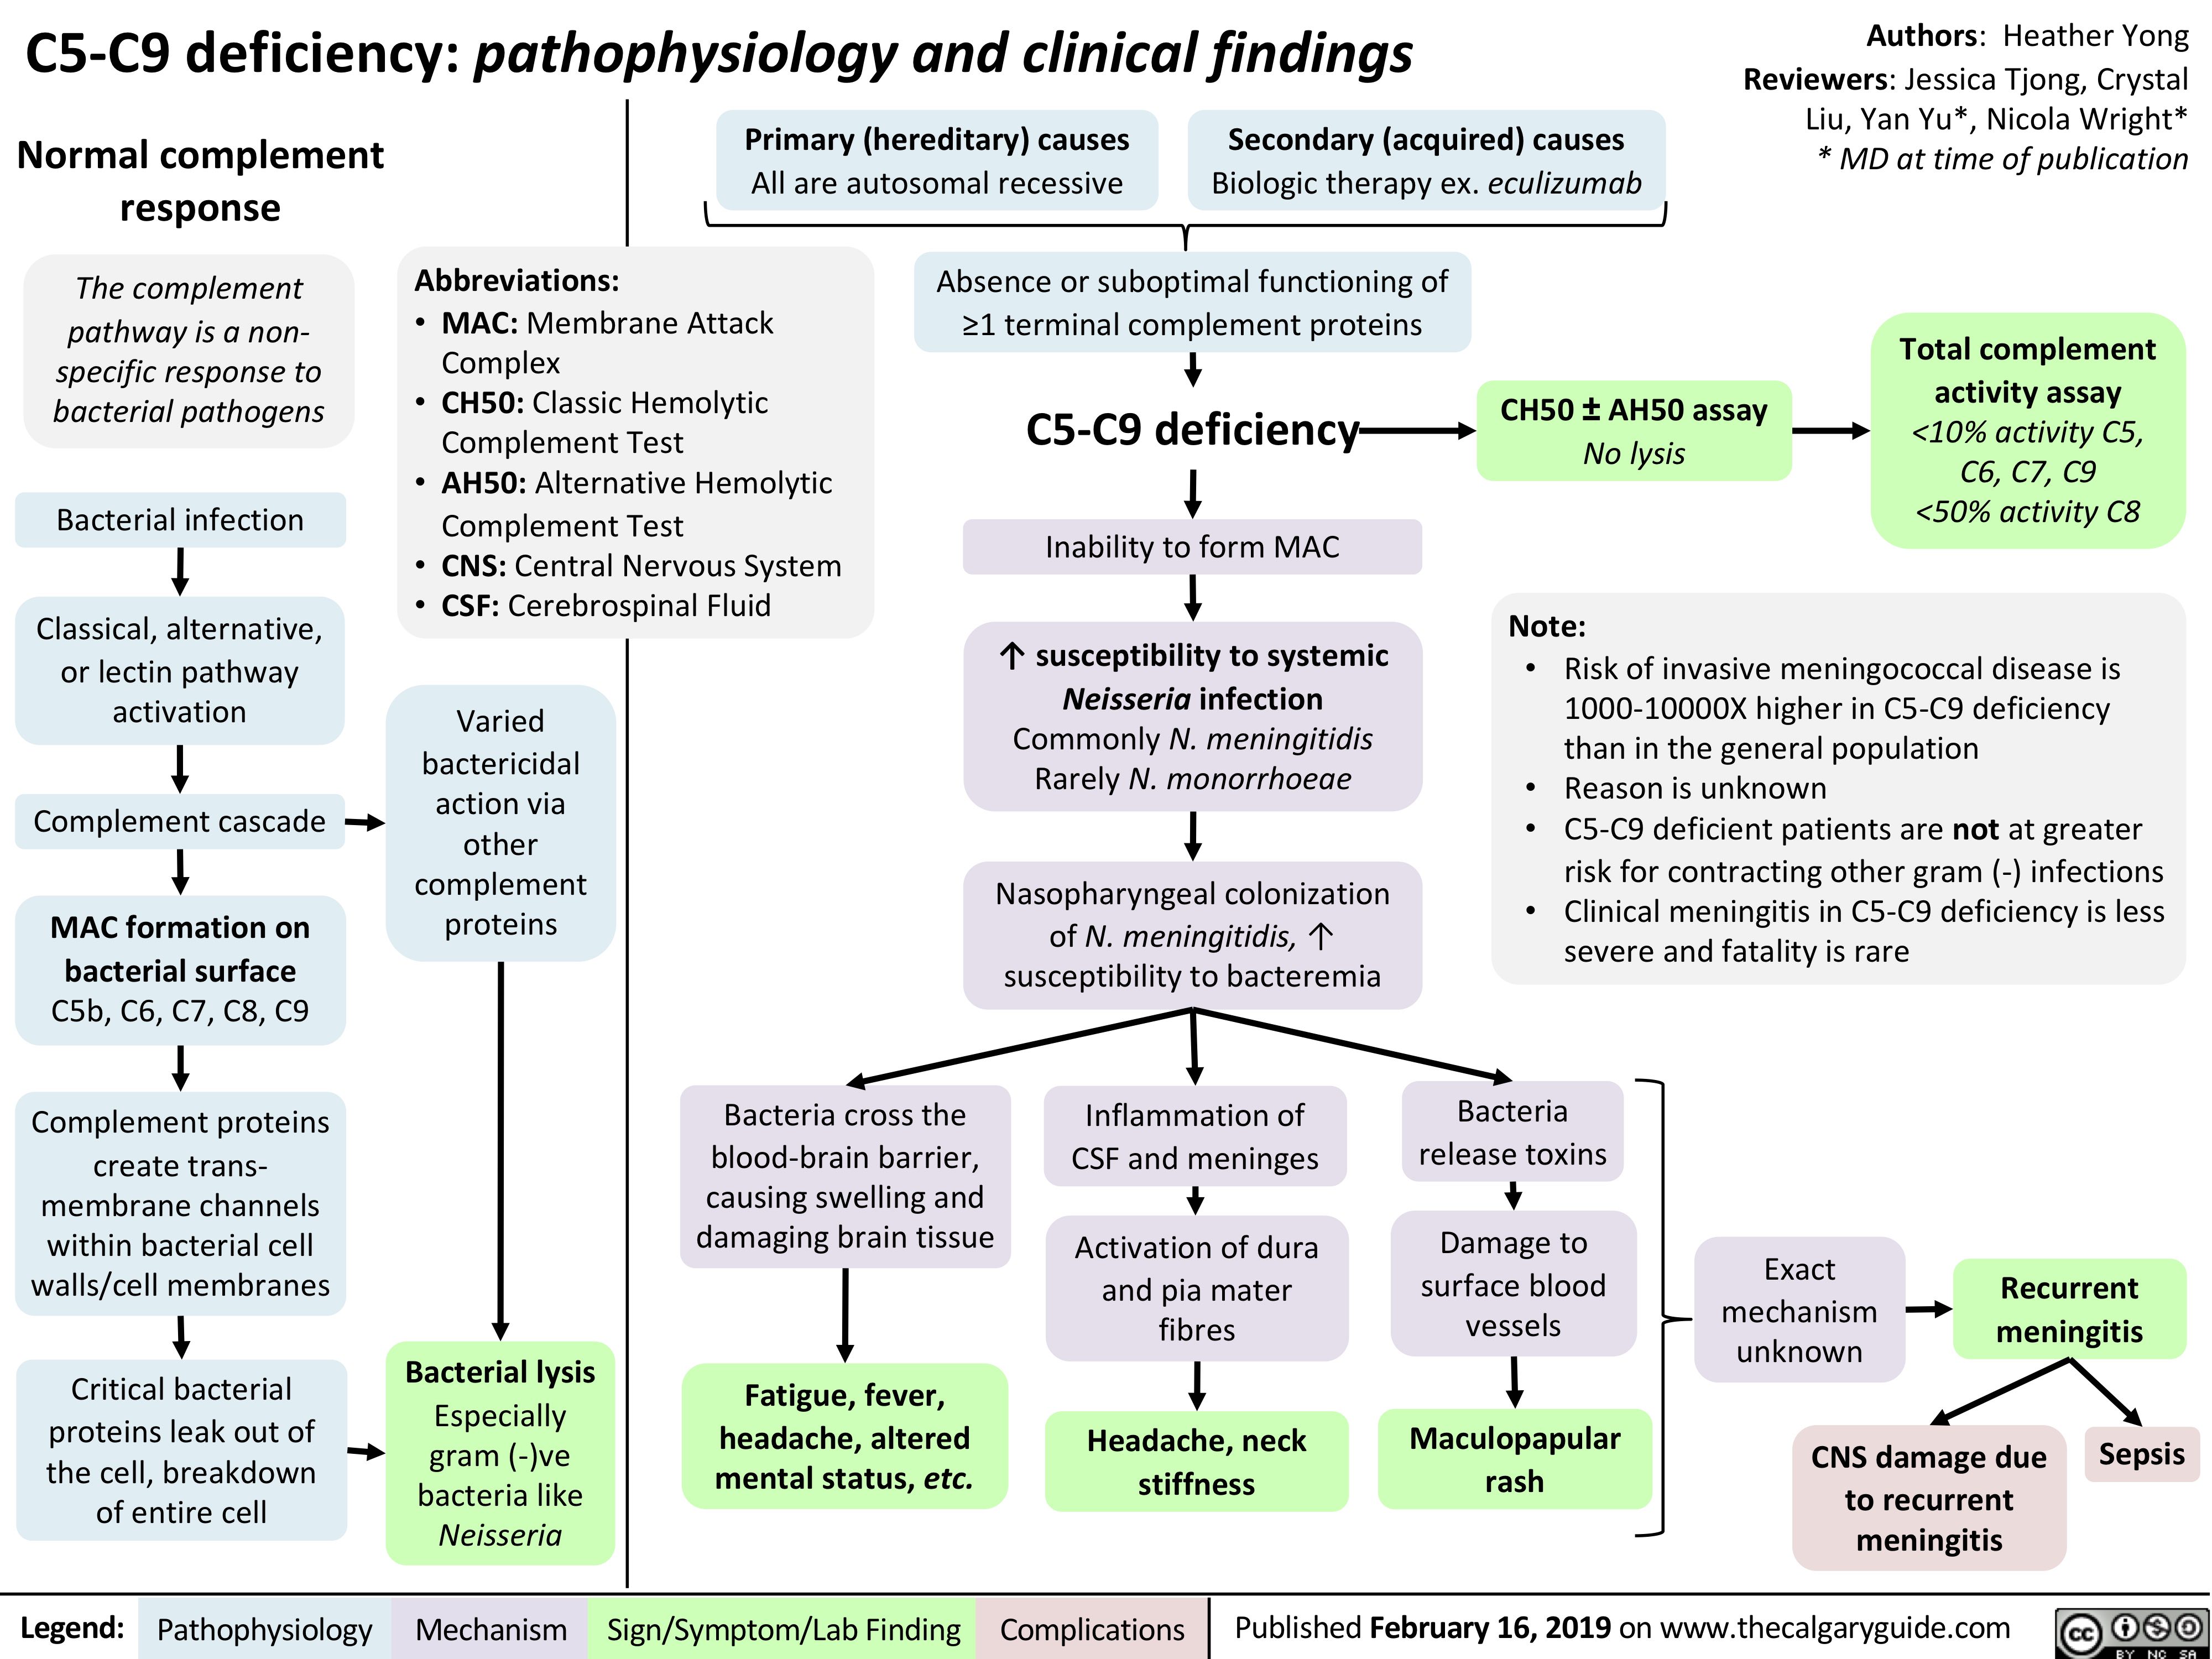 C5-C9 deficiency: pathophysiology and clinical findings
Authors: Heather Yong Reviewers: Jessica Tjong, Crystal Liu, Yan Yu*, Nicola Wright* * MD at time of publication
   Normal complement response
The complement pathway is a non- specific response to bacterial pathogens
Bacterial infection
Classical, alternative, or lectin pathway activation
Complement cascade
MAC formation on bacterial surface C5b, C6, C7, C8, C9
Complement proteins create trans-
membrane channels within bacterial cell walls/cell membranes
Critical bacterial proteins leak out of the cell, breakdown of entire cell
Primary (hereditary) causes Secondary (acquired) causes
All are autosomal recessive Biologic therapy ex. eculizumab Absence or suboptimal functioning of
    Abbreviations:
• MAC: Membrane Attack
Complex
• CH50: Classic Hemolytic
Complement Test
• AH50: Alternative Hemolytic
Complement Test
• CNS: Central Nervous System • CSF: Cerebrospinal Fluid
≥1 terminal complement proteins
C5-C9 deficiency
Inability to form MAC
↑ susceptibility to systemic Neisseria infection
Commonly N. meningitidis Rarely N. monorrhoeae
Nasopharyngeal colonization of N. meningitidis, ↑ susceptibility to bacteremia
CH50 ± AH50 assay No lysis
Note:
Total complement activity assay <10% activity C5, C6, C7, C9 <50% activity C8
              Varied bactericidal action via other complement proteins
• Risk of invasive meningococcal disease is 1000-10000X higher in C5-C9 deficiency than in the general population
• Reason is unknown
• C5-C9 deficient patients are not at greater
risk for contracting other gram (-) infections • Clinical meningitis in C5-C9 deficiency is less
       severe and fatality is rare
                   Bacterial lysis
Especially gram (-)ve bacteria like Neisseria
Bacteria cross the blood-brain barrier, causing swelling and damaging brain tissue
Fatigue, fever, headache, altered mental status, etc.
Inflammation of CSF and meninges
Activation of dura and pia mater fibres
Headache, neck stiffness
Bacteria release toxins
Damage to surface blood vessels
Maculopapular rash
Exact mechanism unknown
Recurrent meningitis
         CNS damage due Sepsis to recurrent
meningitis
  Legend:
 Pathophysiology
Mechanism
Sign/Symptom/Lab Finding
  Complications
Published February 16, 2019 on www.thecalgaryguide.com
    